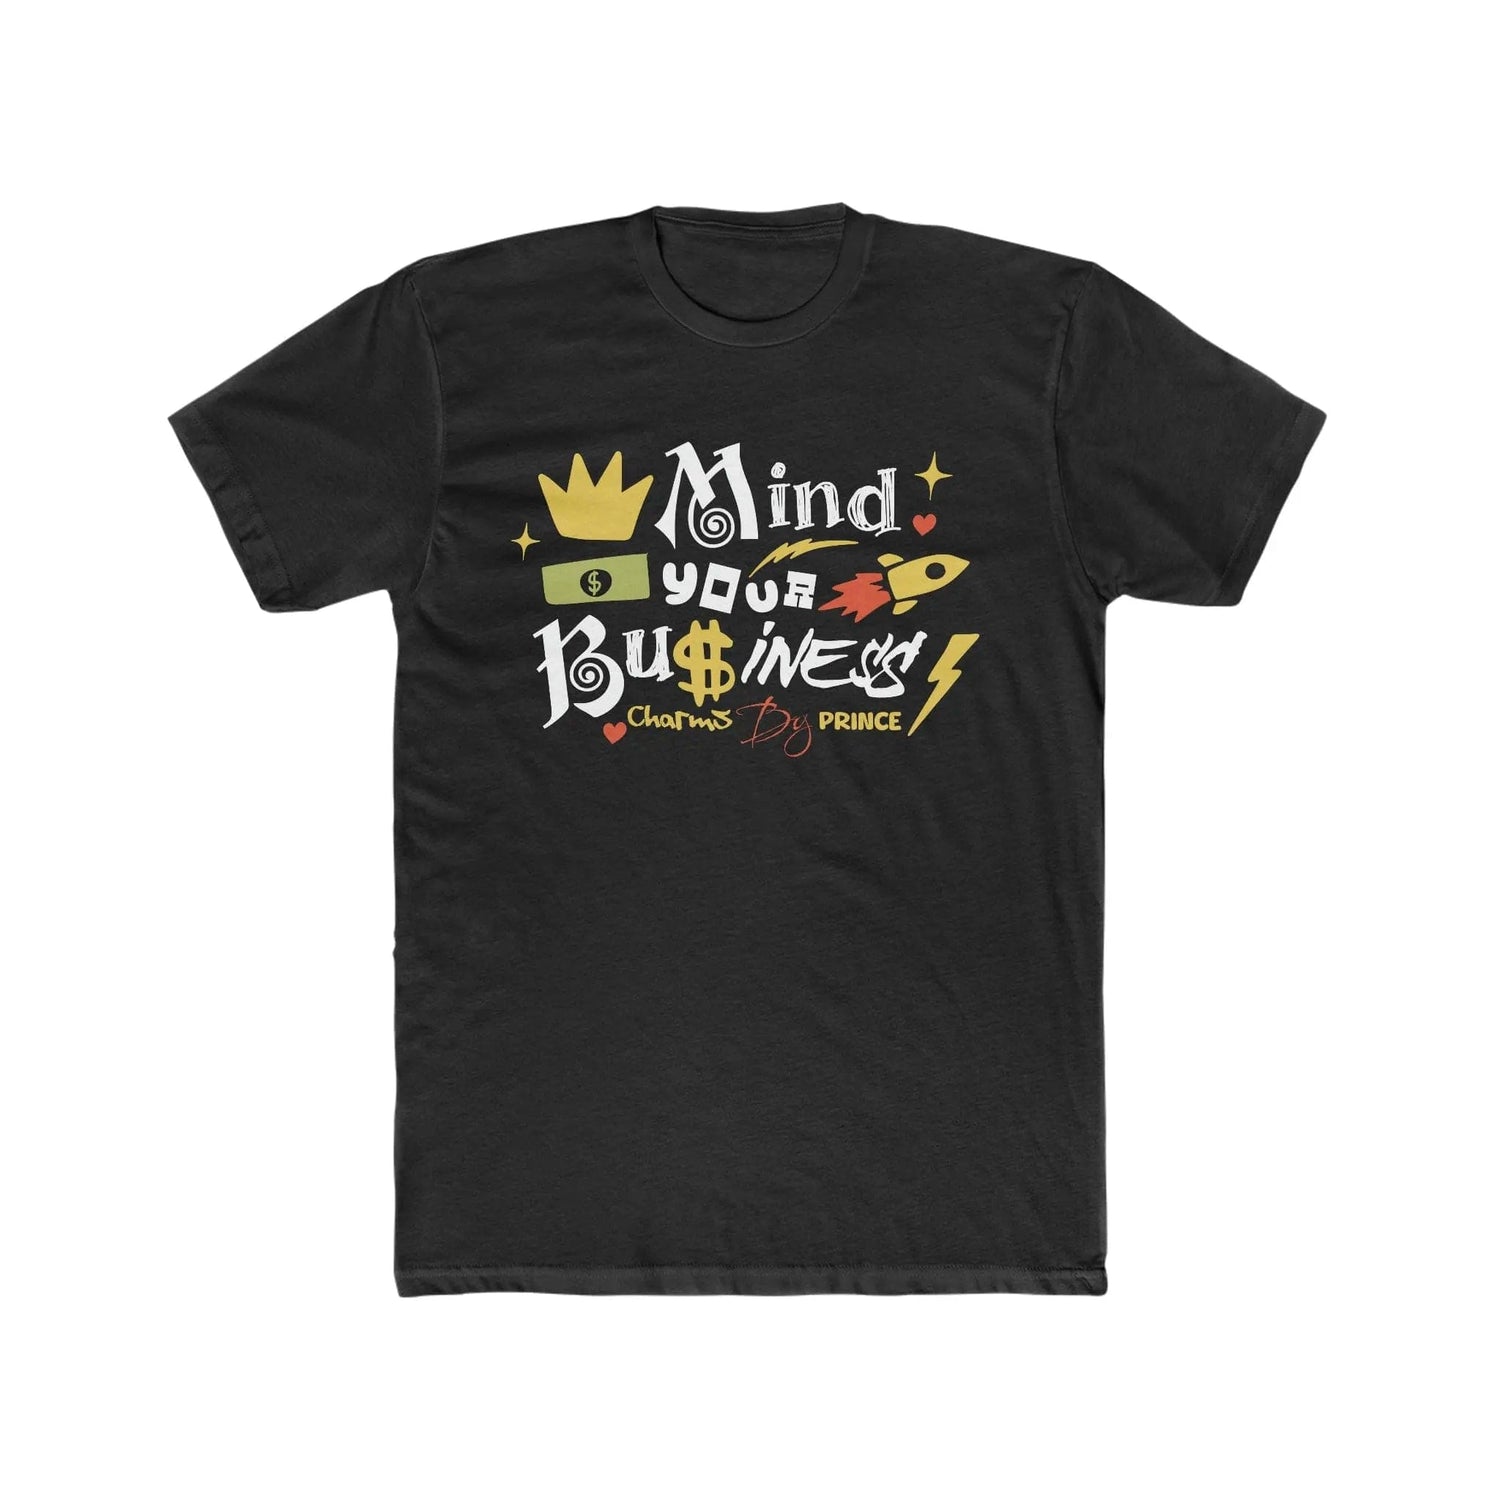 Mind Your Business Cotton Crew Tee Printifyshop_this_look_EcLGgQ